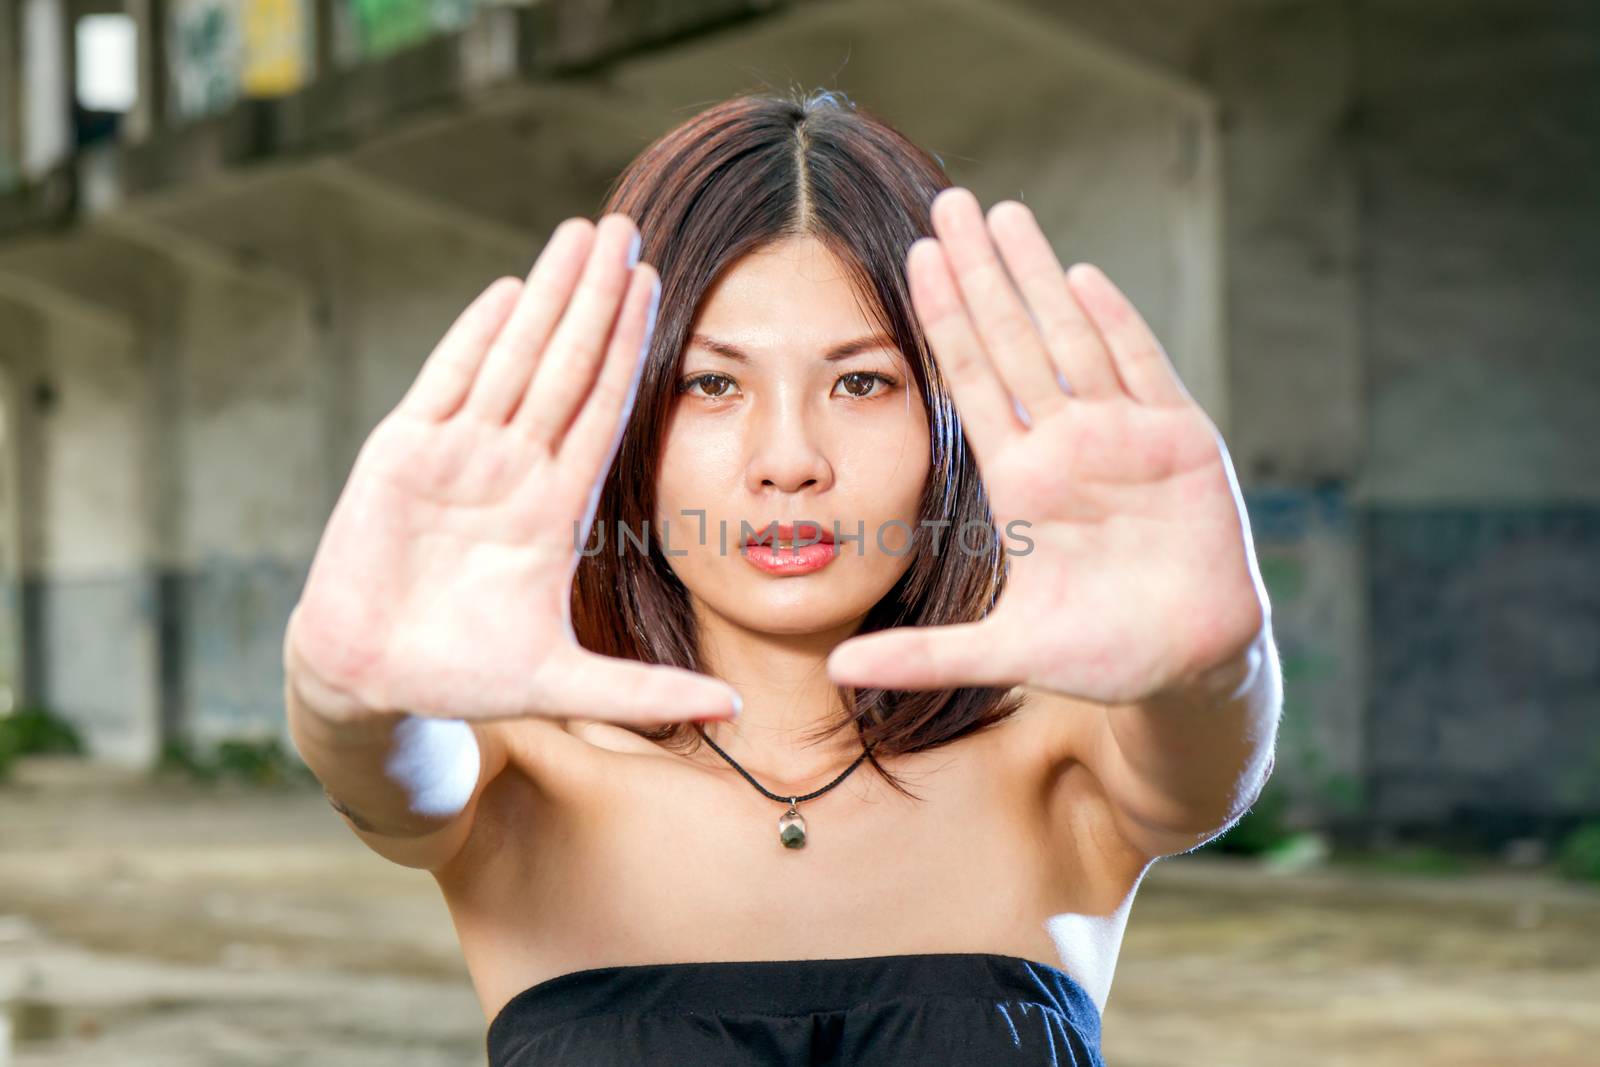 Chinese woman with hands stretched out in front of face by imagesbykenny